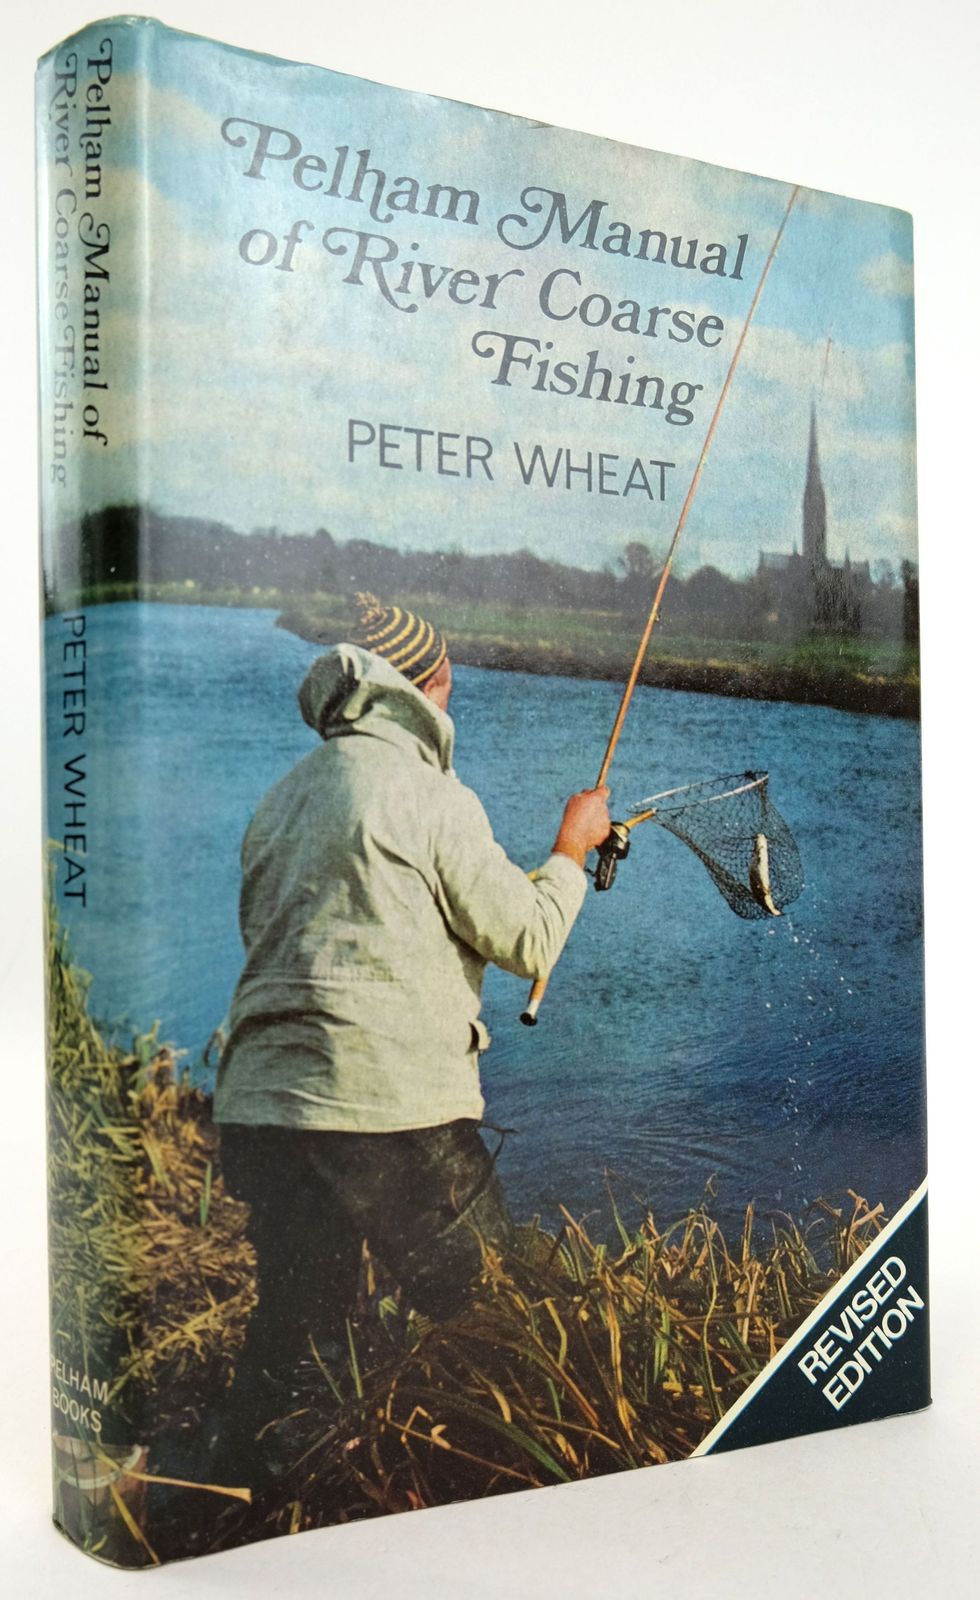 Photo of PELHAM MANUAL OF RIVER COARSE FISHING written by Wheat, Peter published by Pelham (STOCK CODE: 1819194)  for sale by Stella & Rose's Books